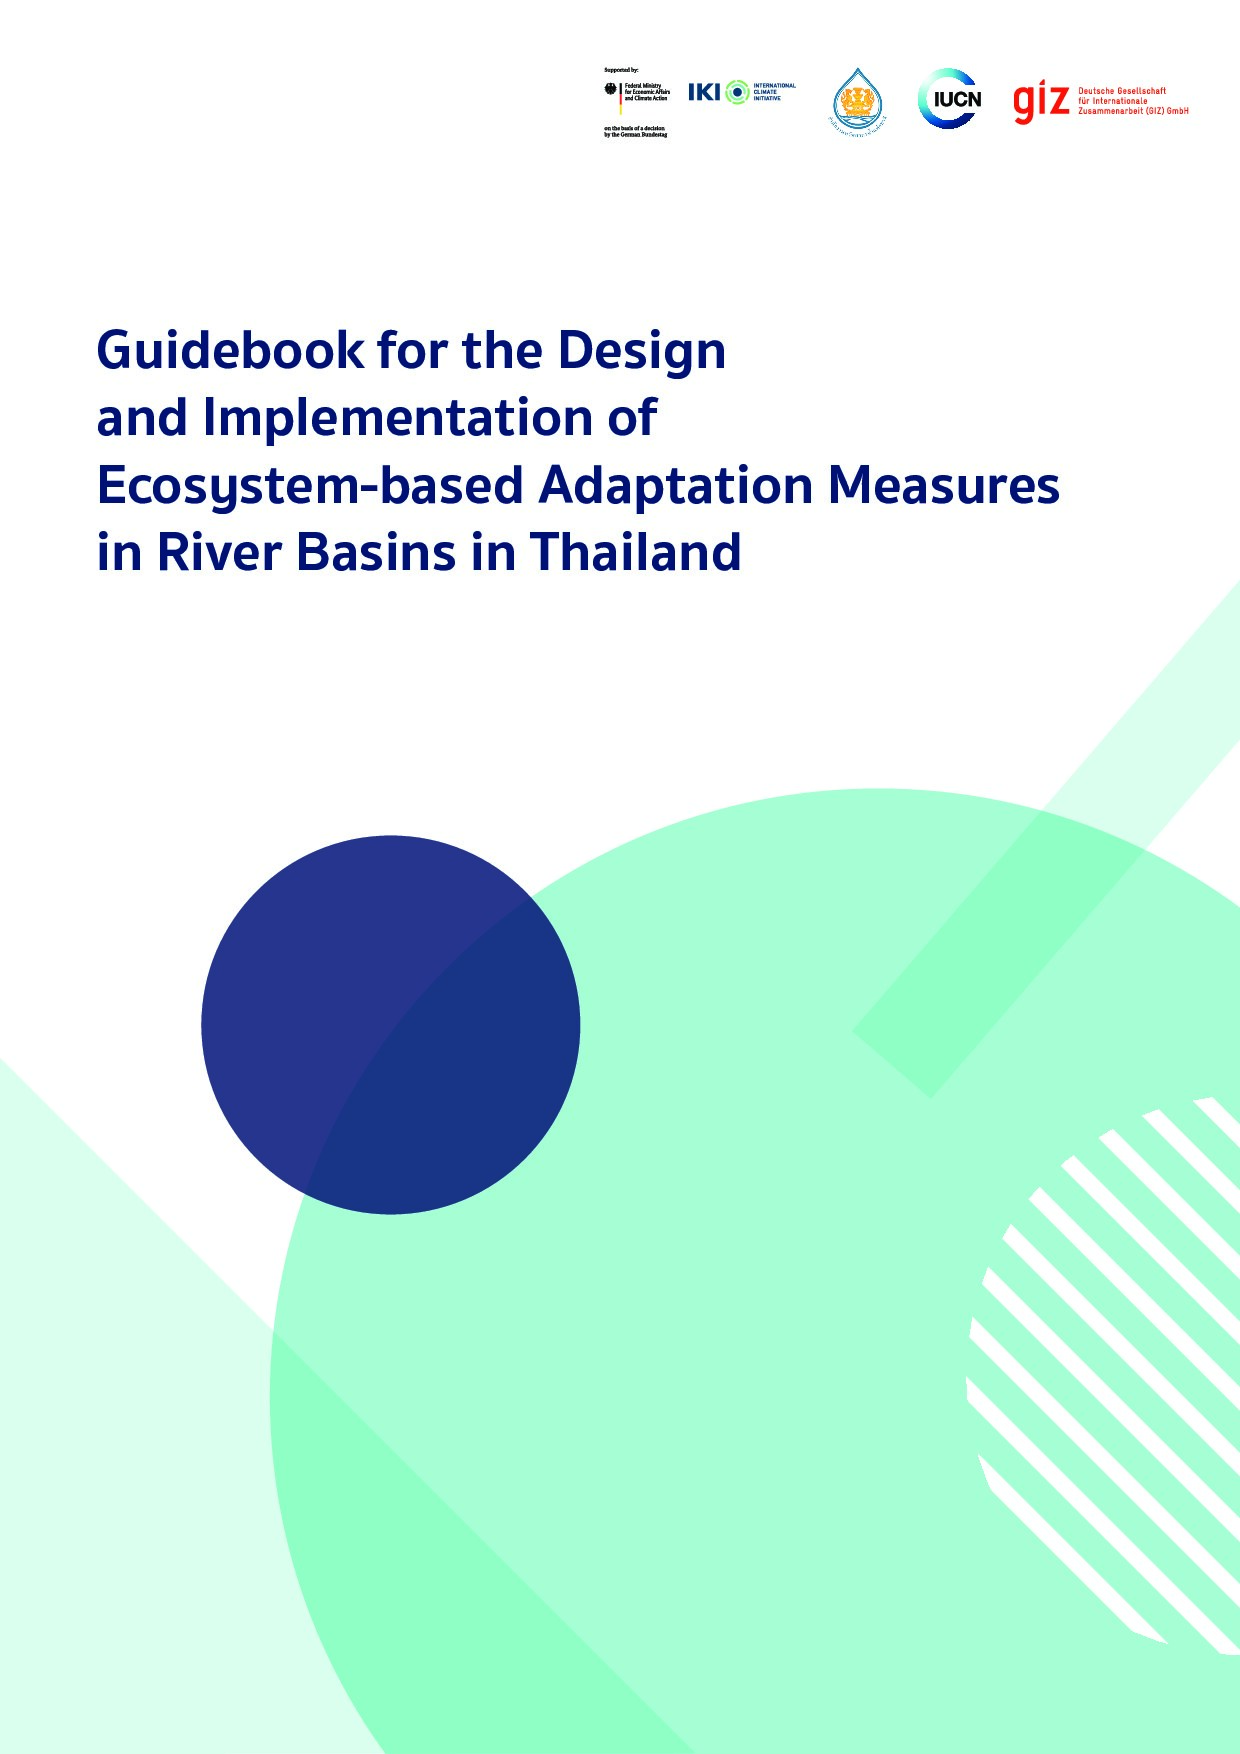 Guidebook for the Design and Implementation of Ecosystem-based Adaptation Measures in River Basins in Thailand